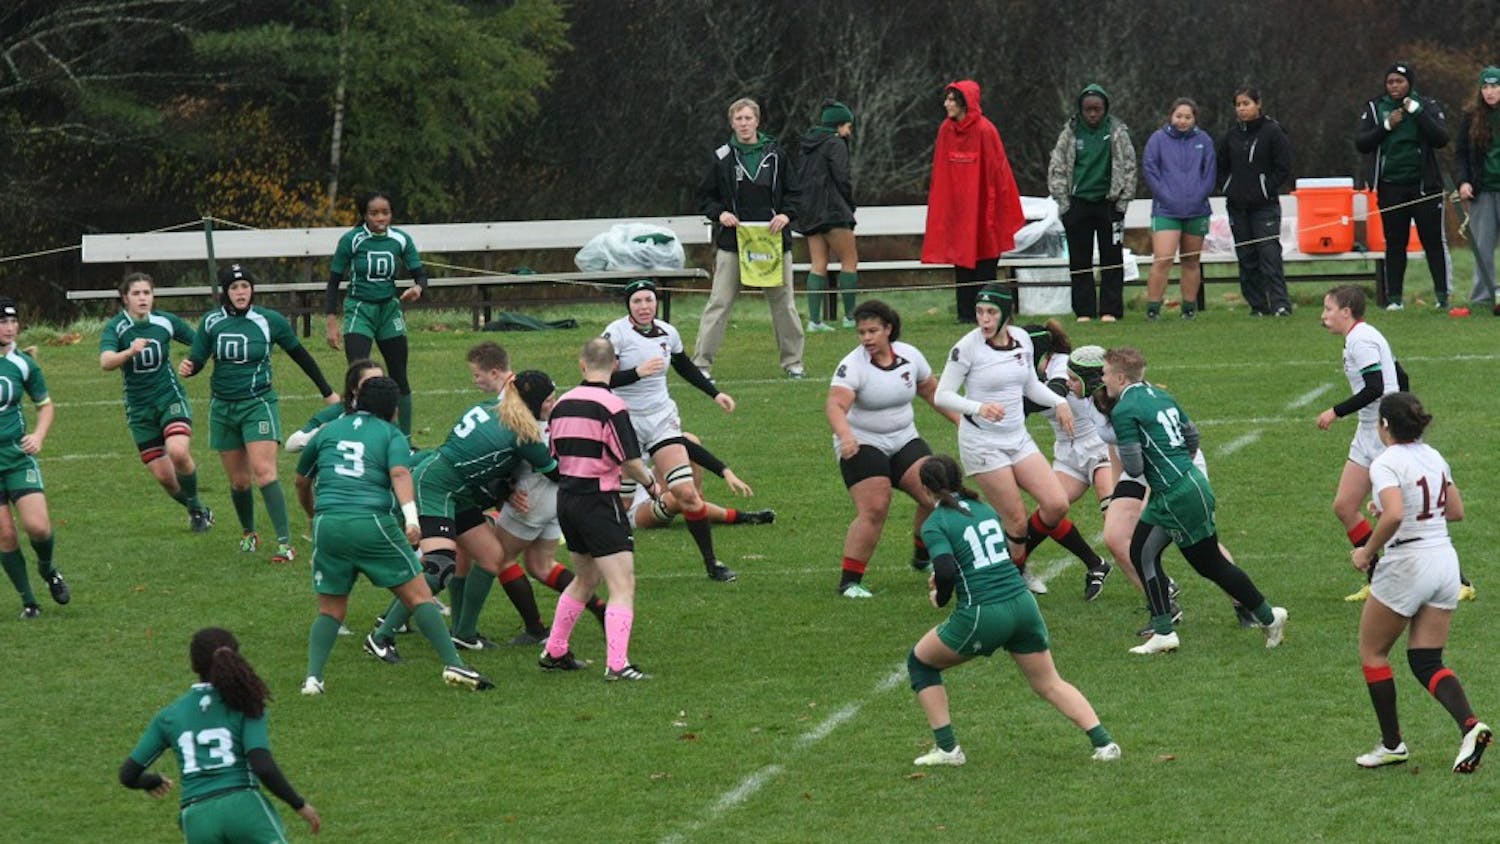 The women's rugby team went varsity in 2015.